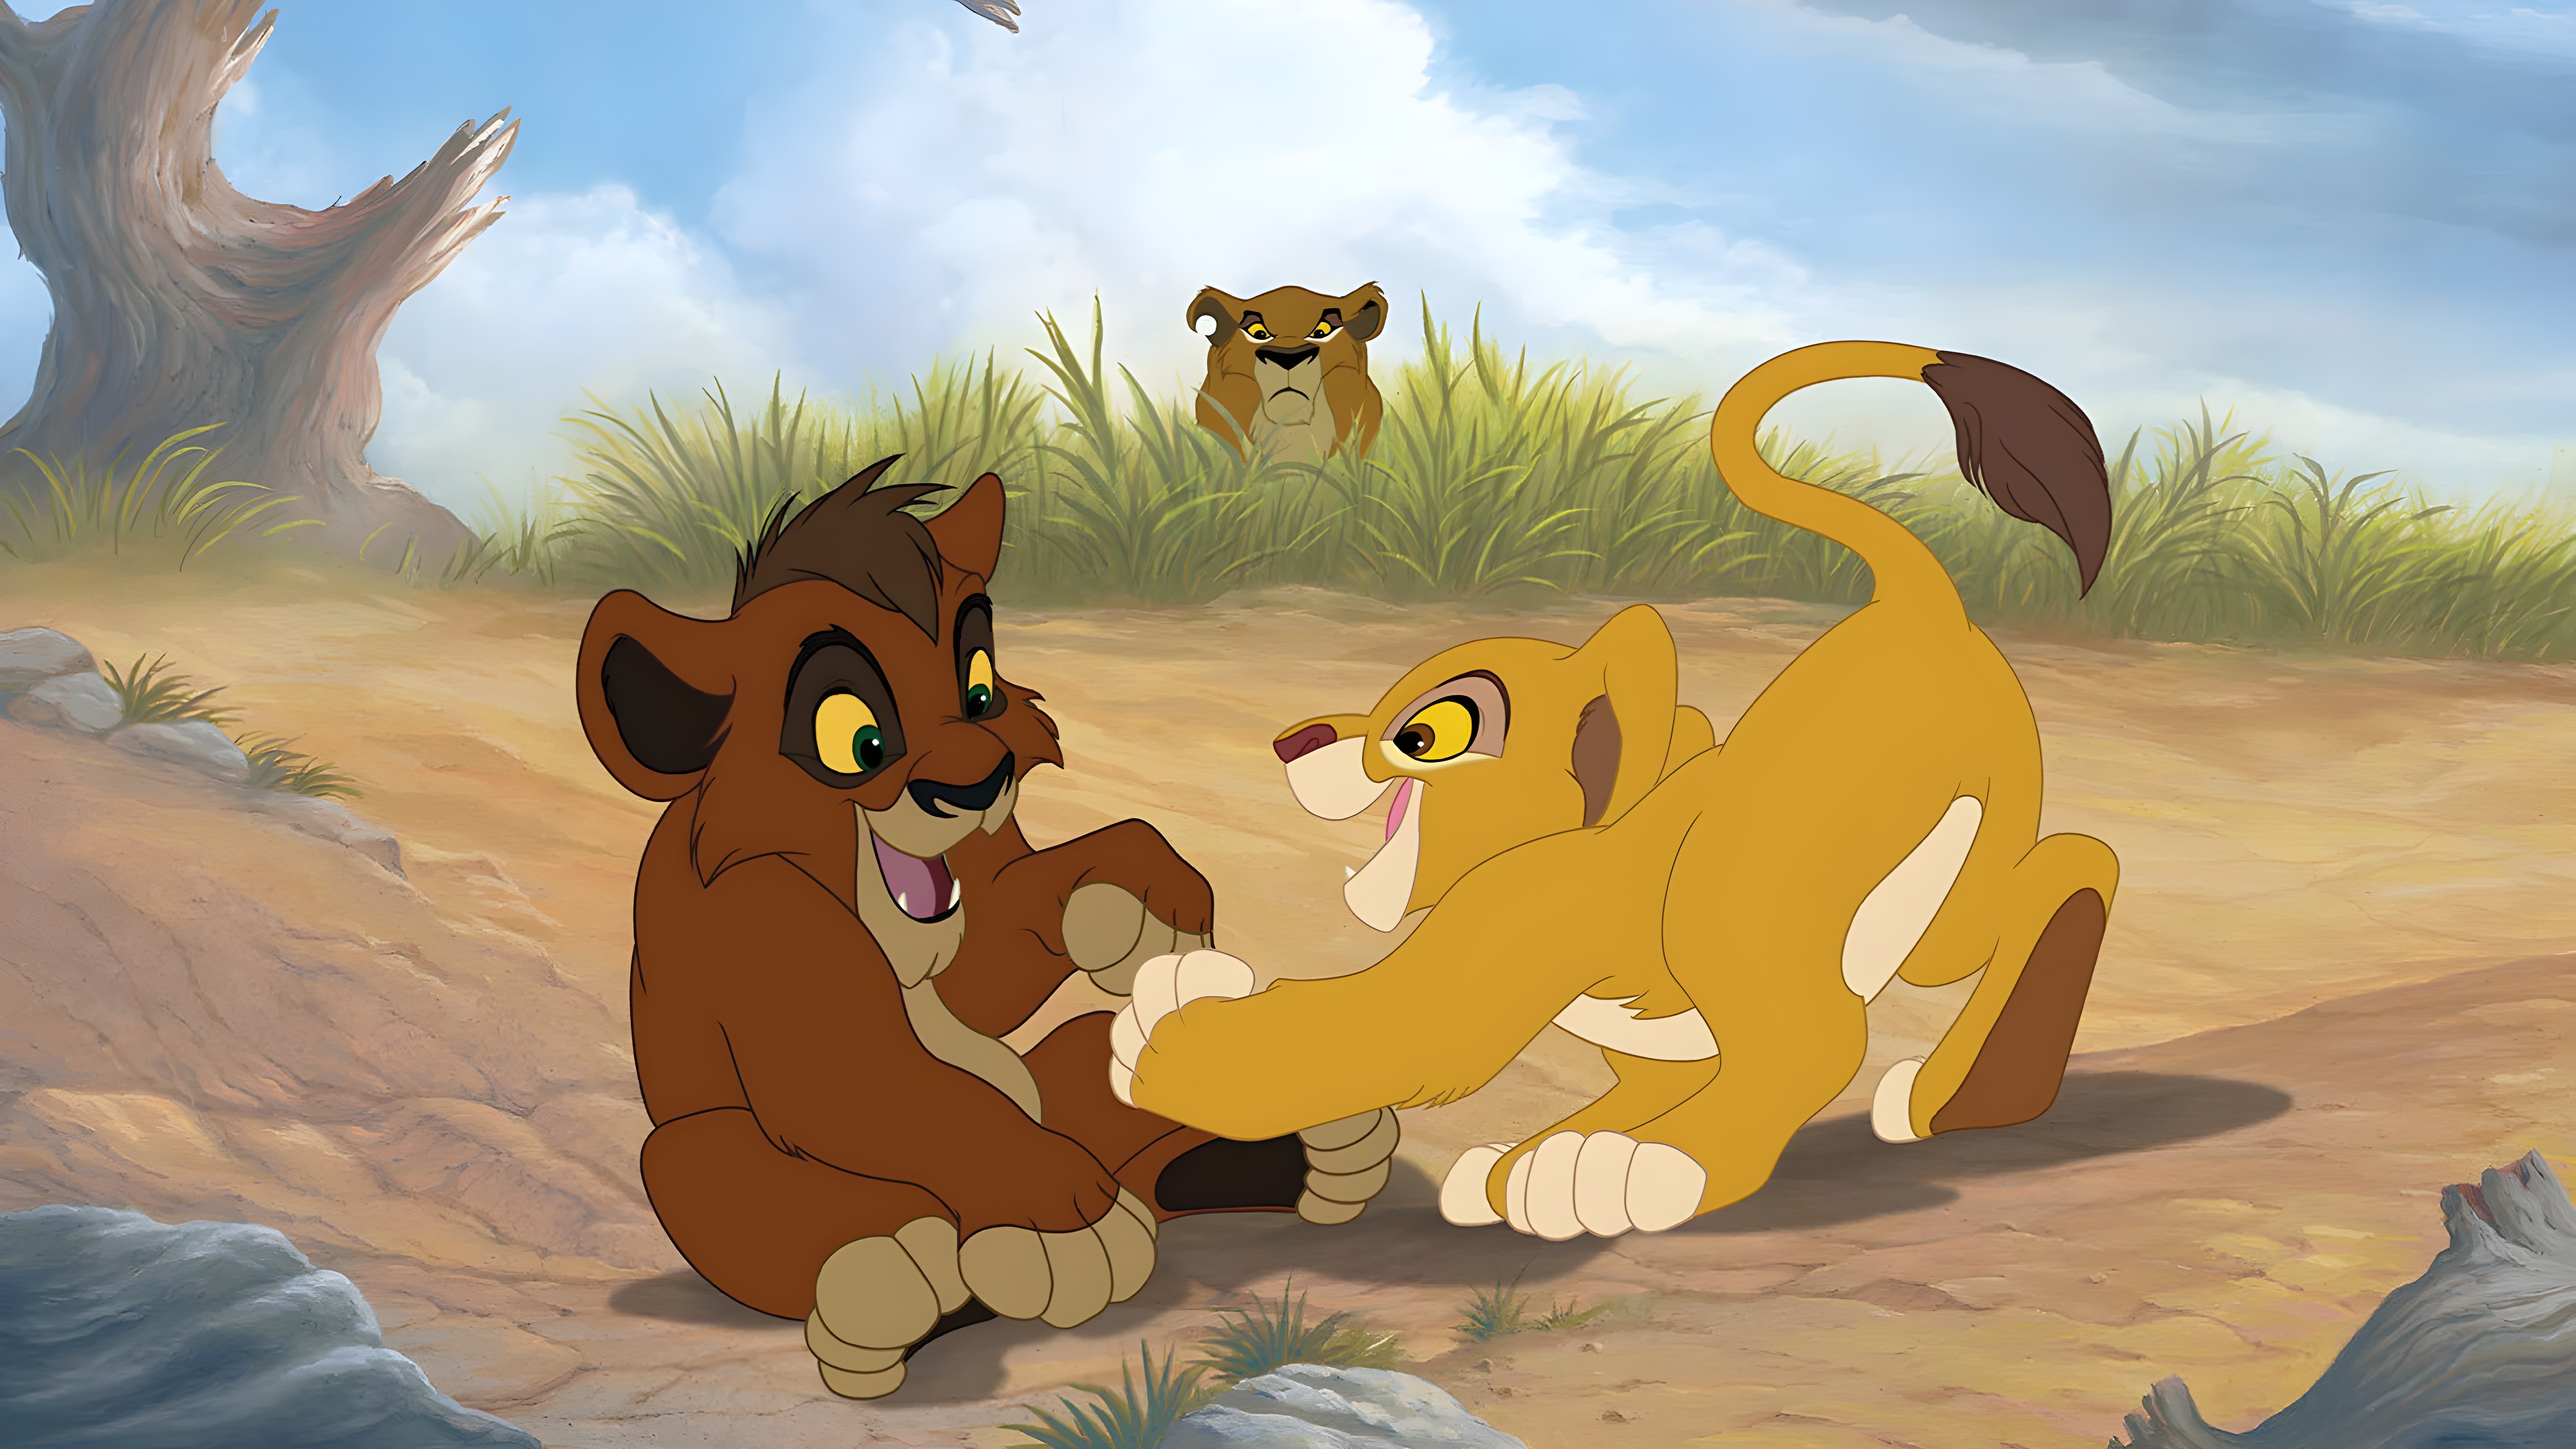 Movie The Lion King 2: Simba's Pride HD Wallpaper | Background Image